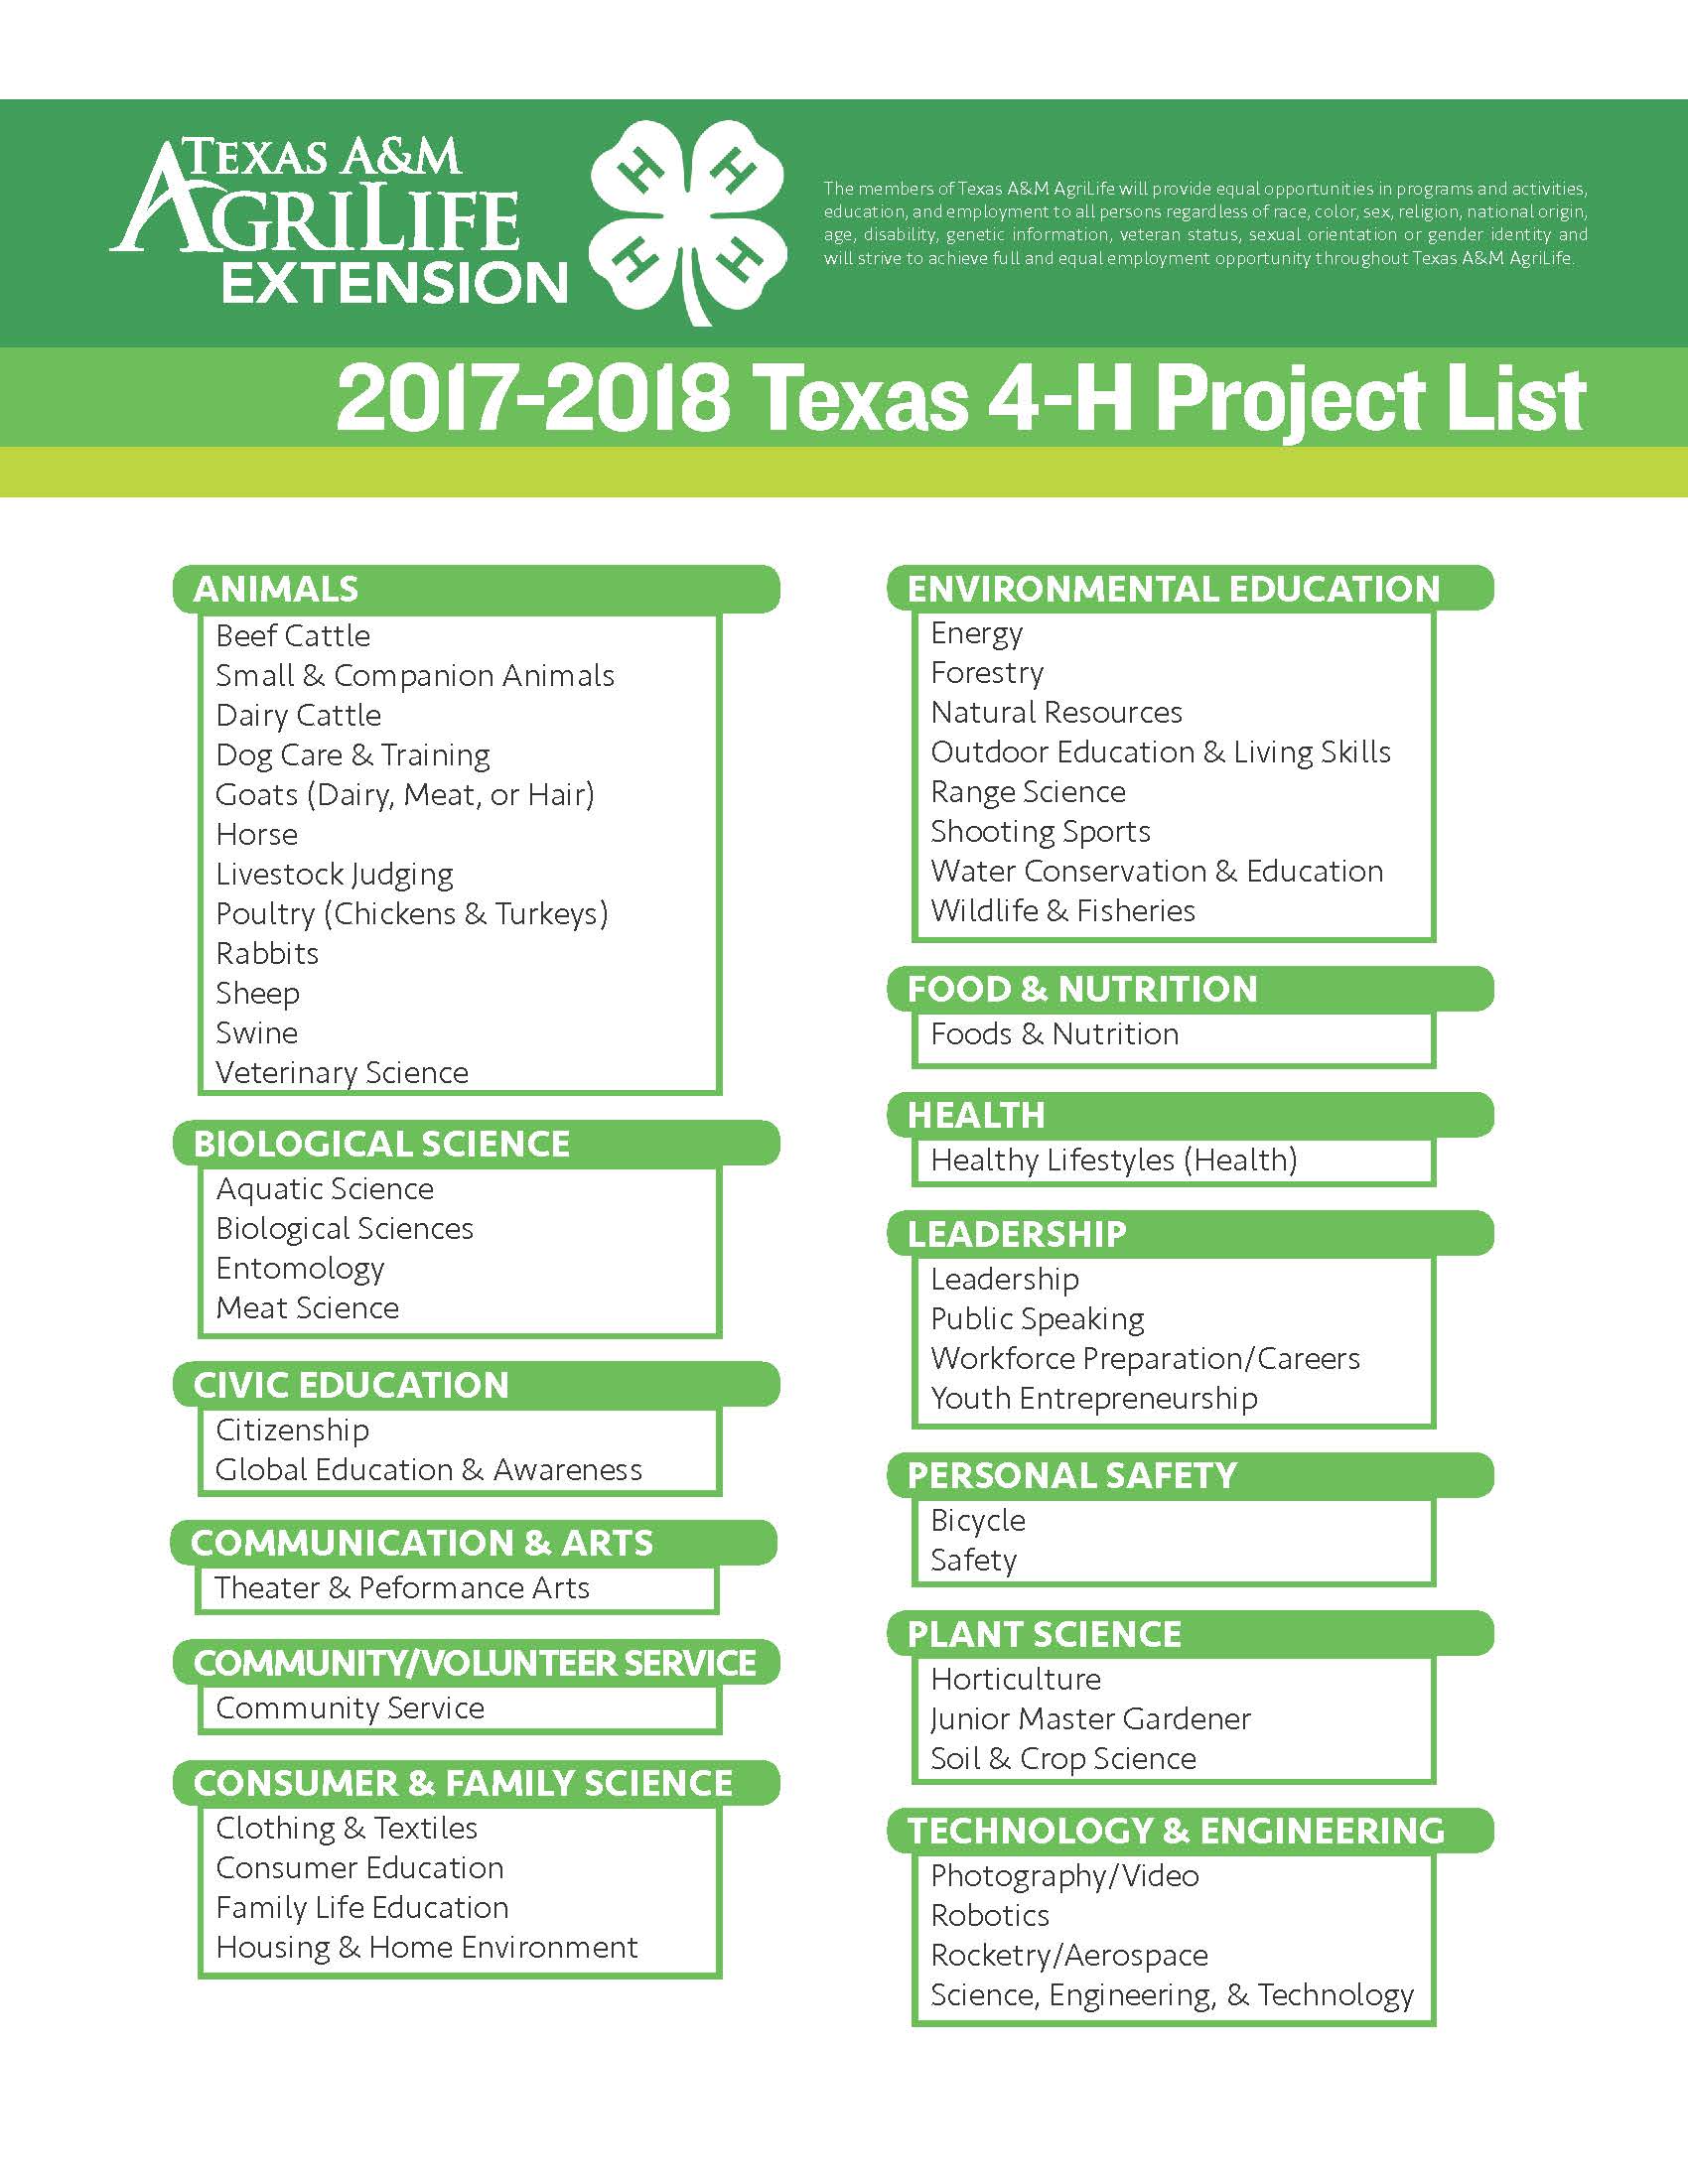 4 H Projects Bell County 4 H